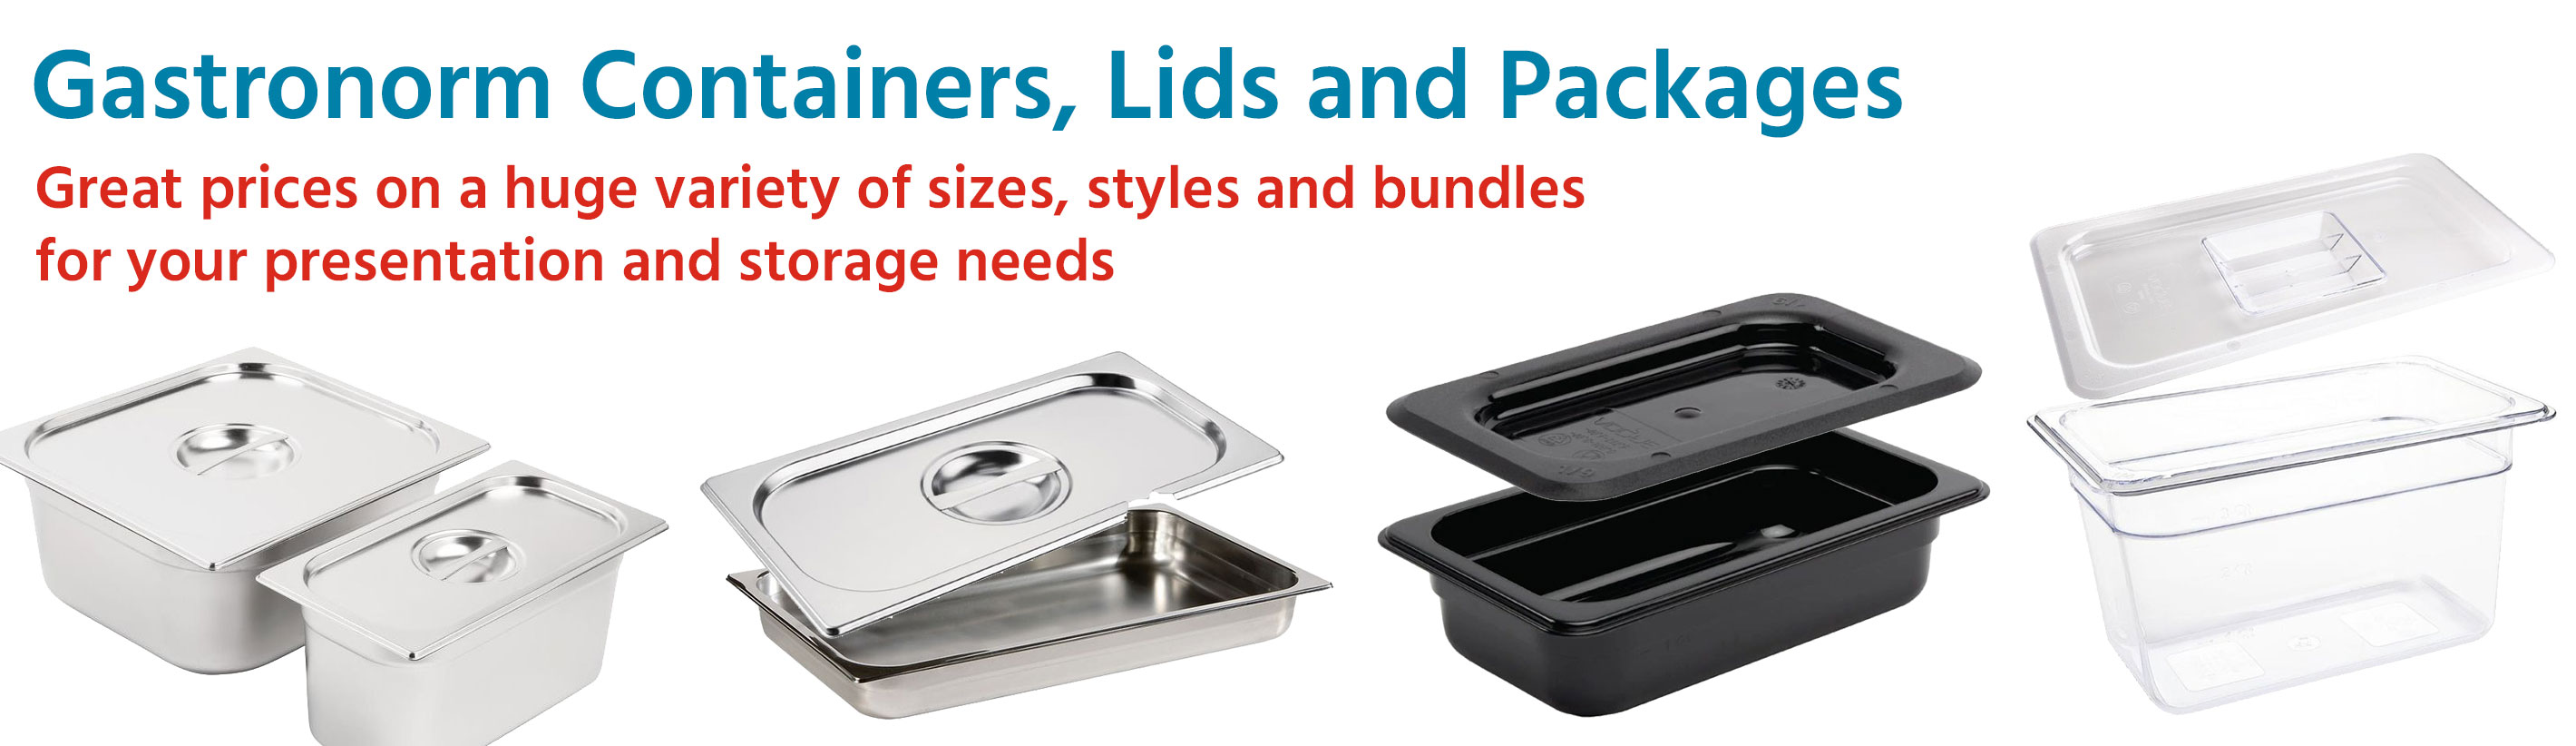 Gastronorm Containers, Lids and Packages, Great prices on a huge variety of sizes, styles and bundles for your presentation and storage needs